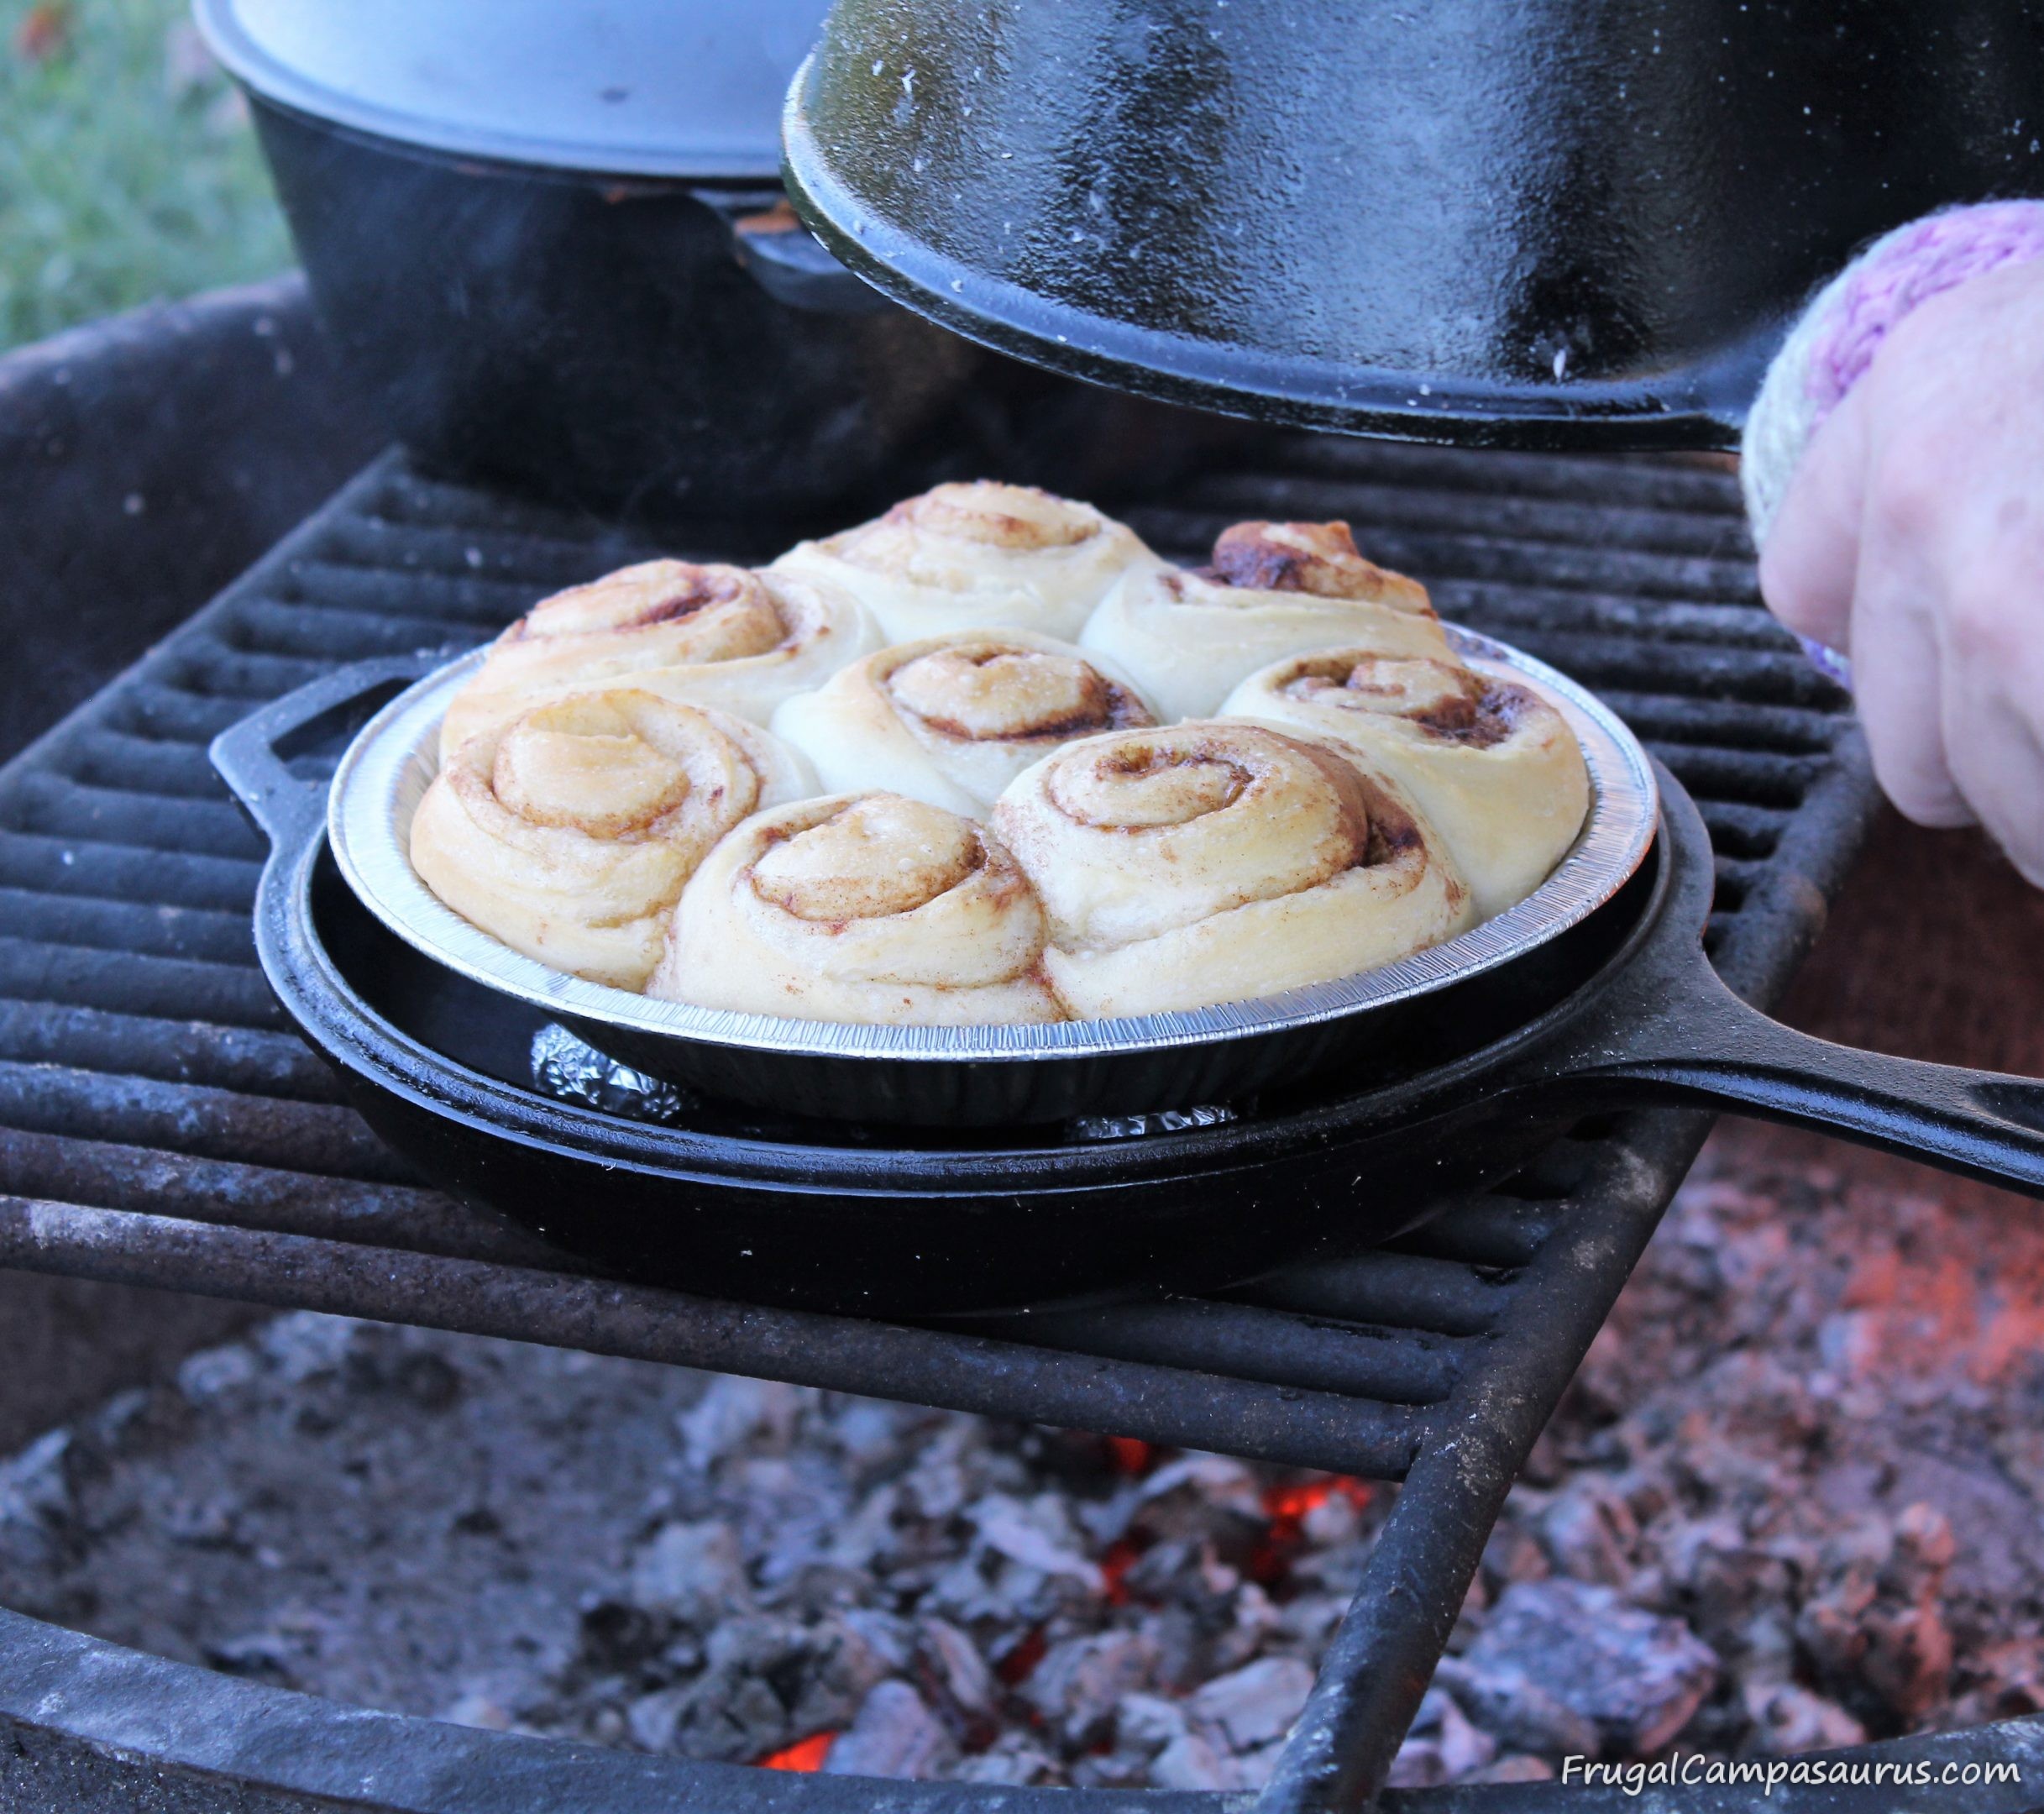 New (to me) Dutch Oven Cooking Method= Delicious Cinnamon Rolls